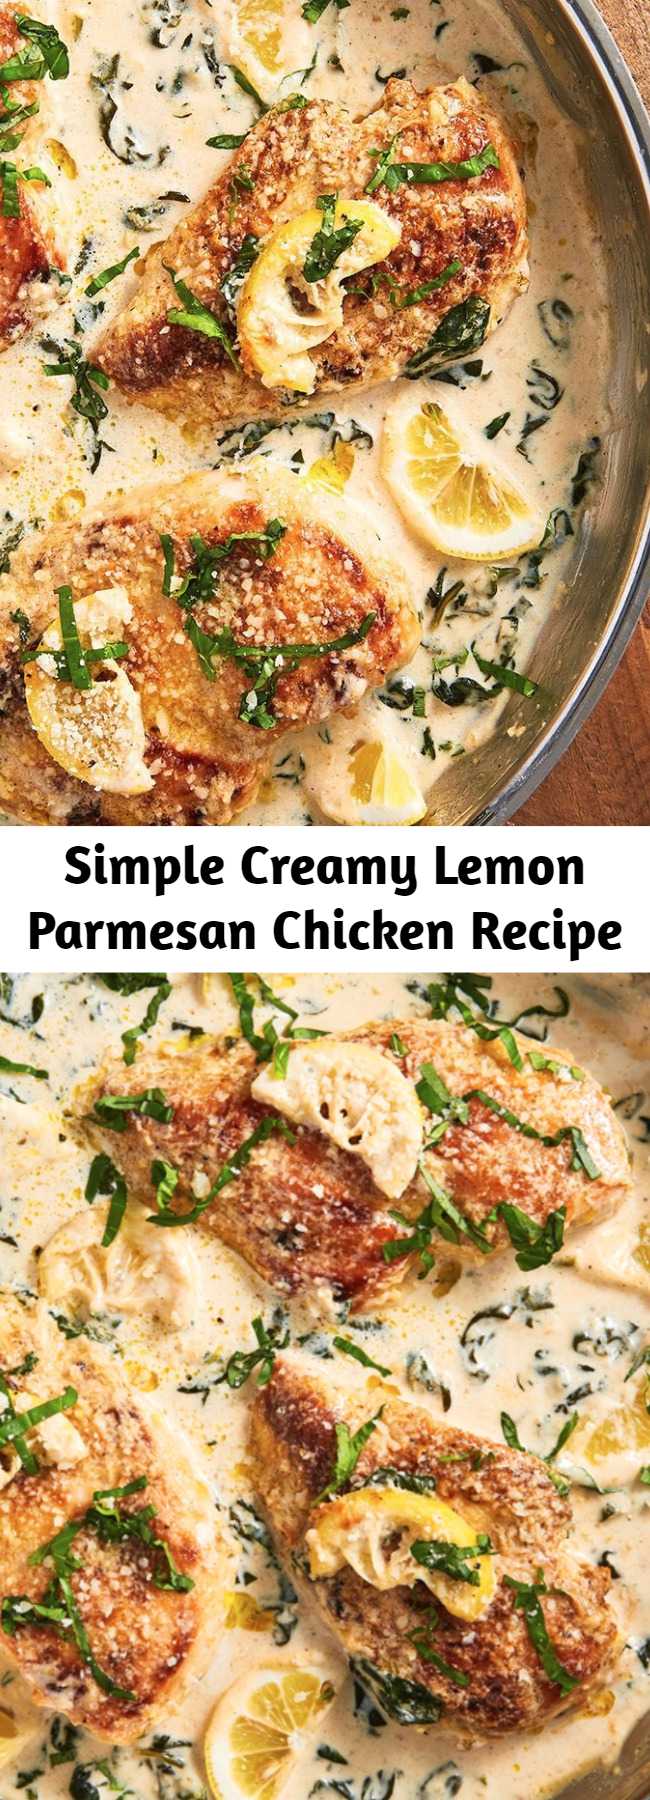 Simple Creamy Lemon Parmesan Chicken Recipe - When it comes to weeknight dinners, this is what we dream of. It's simple, creamy, and so dang satisfying. Have dinner ready in a snap with this one pan meal.